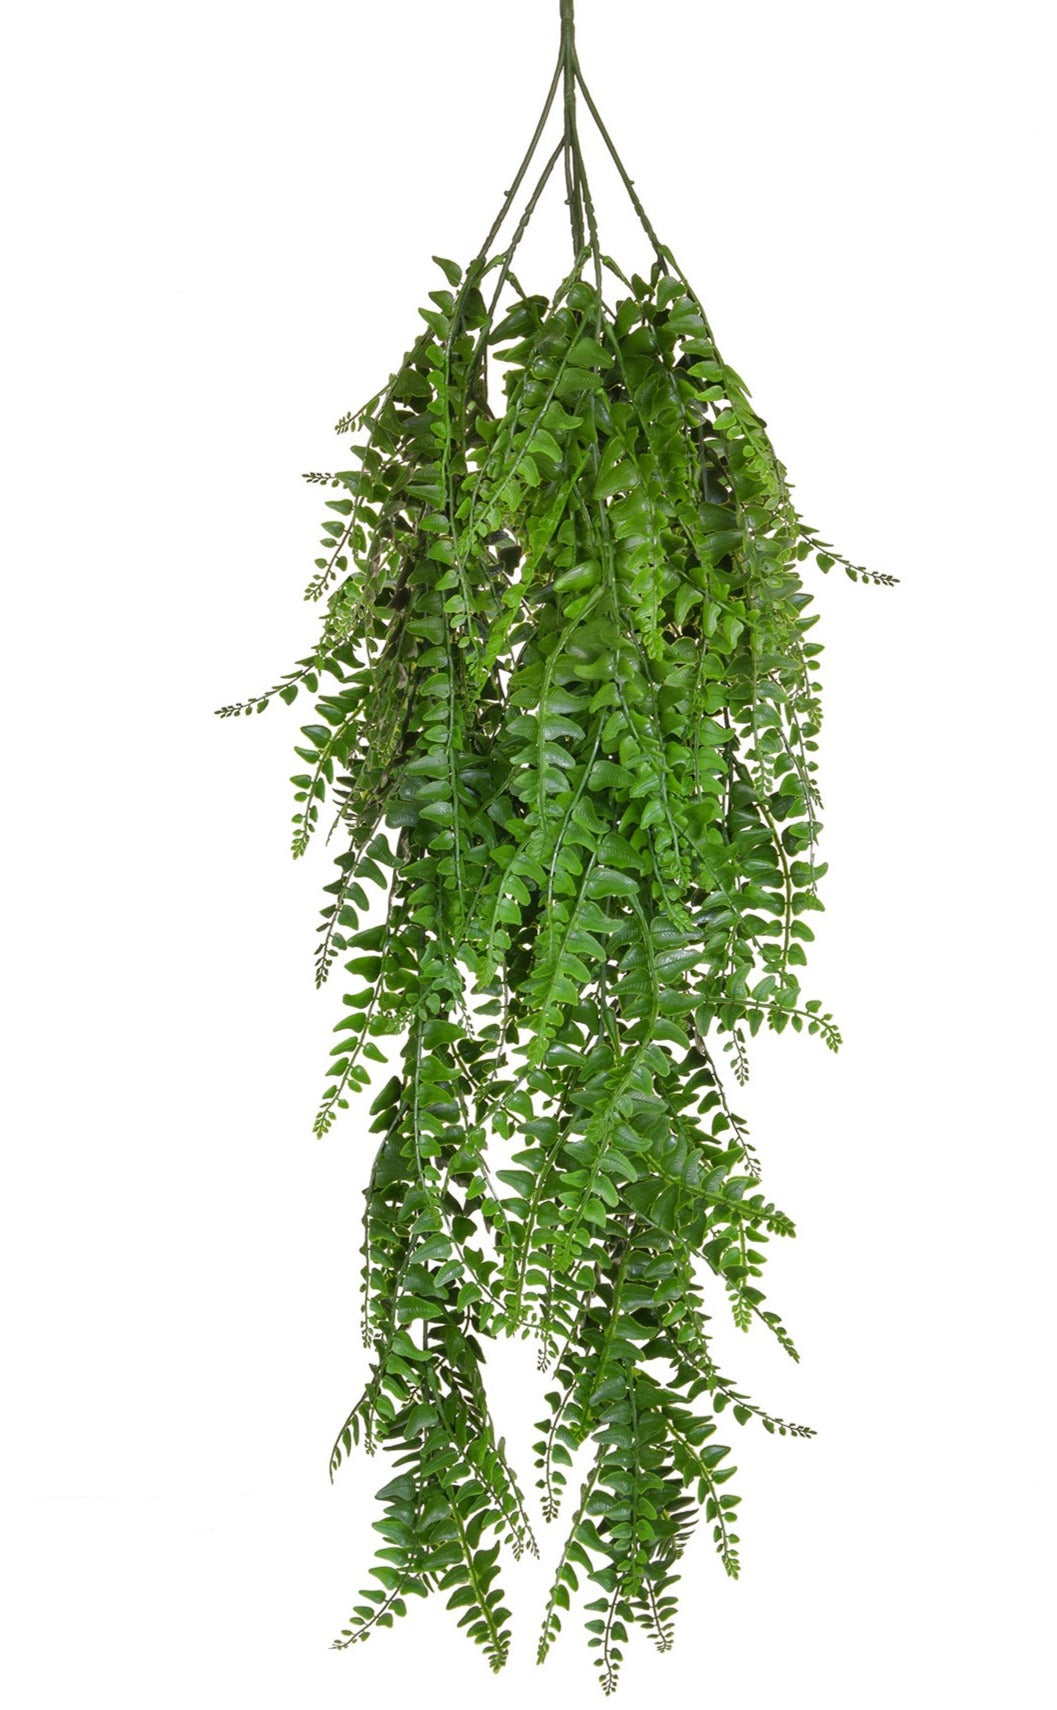 Fire retardant and UV resistant trailing fern plant for bars and restaurants